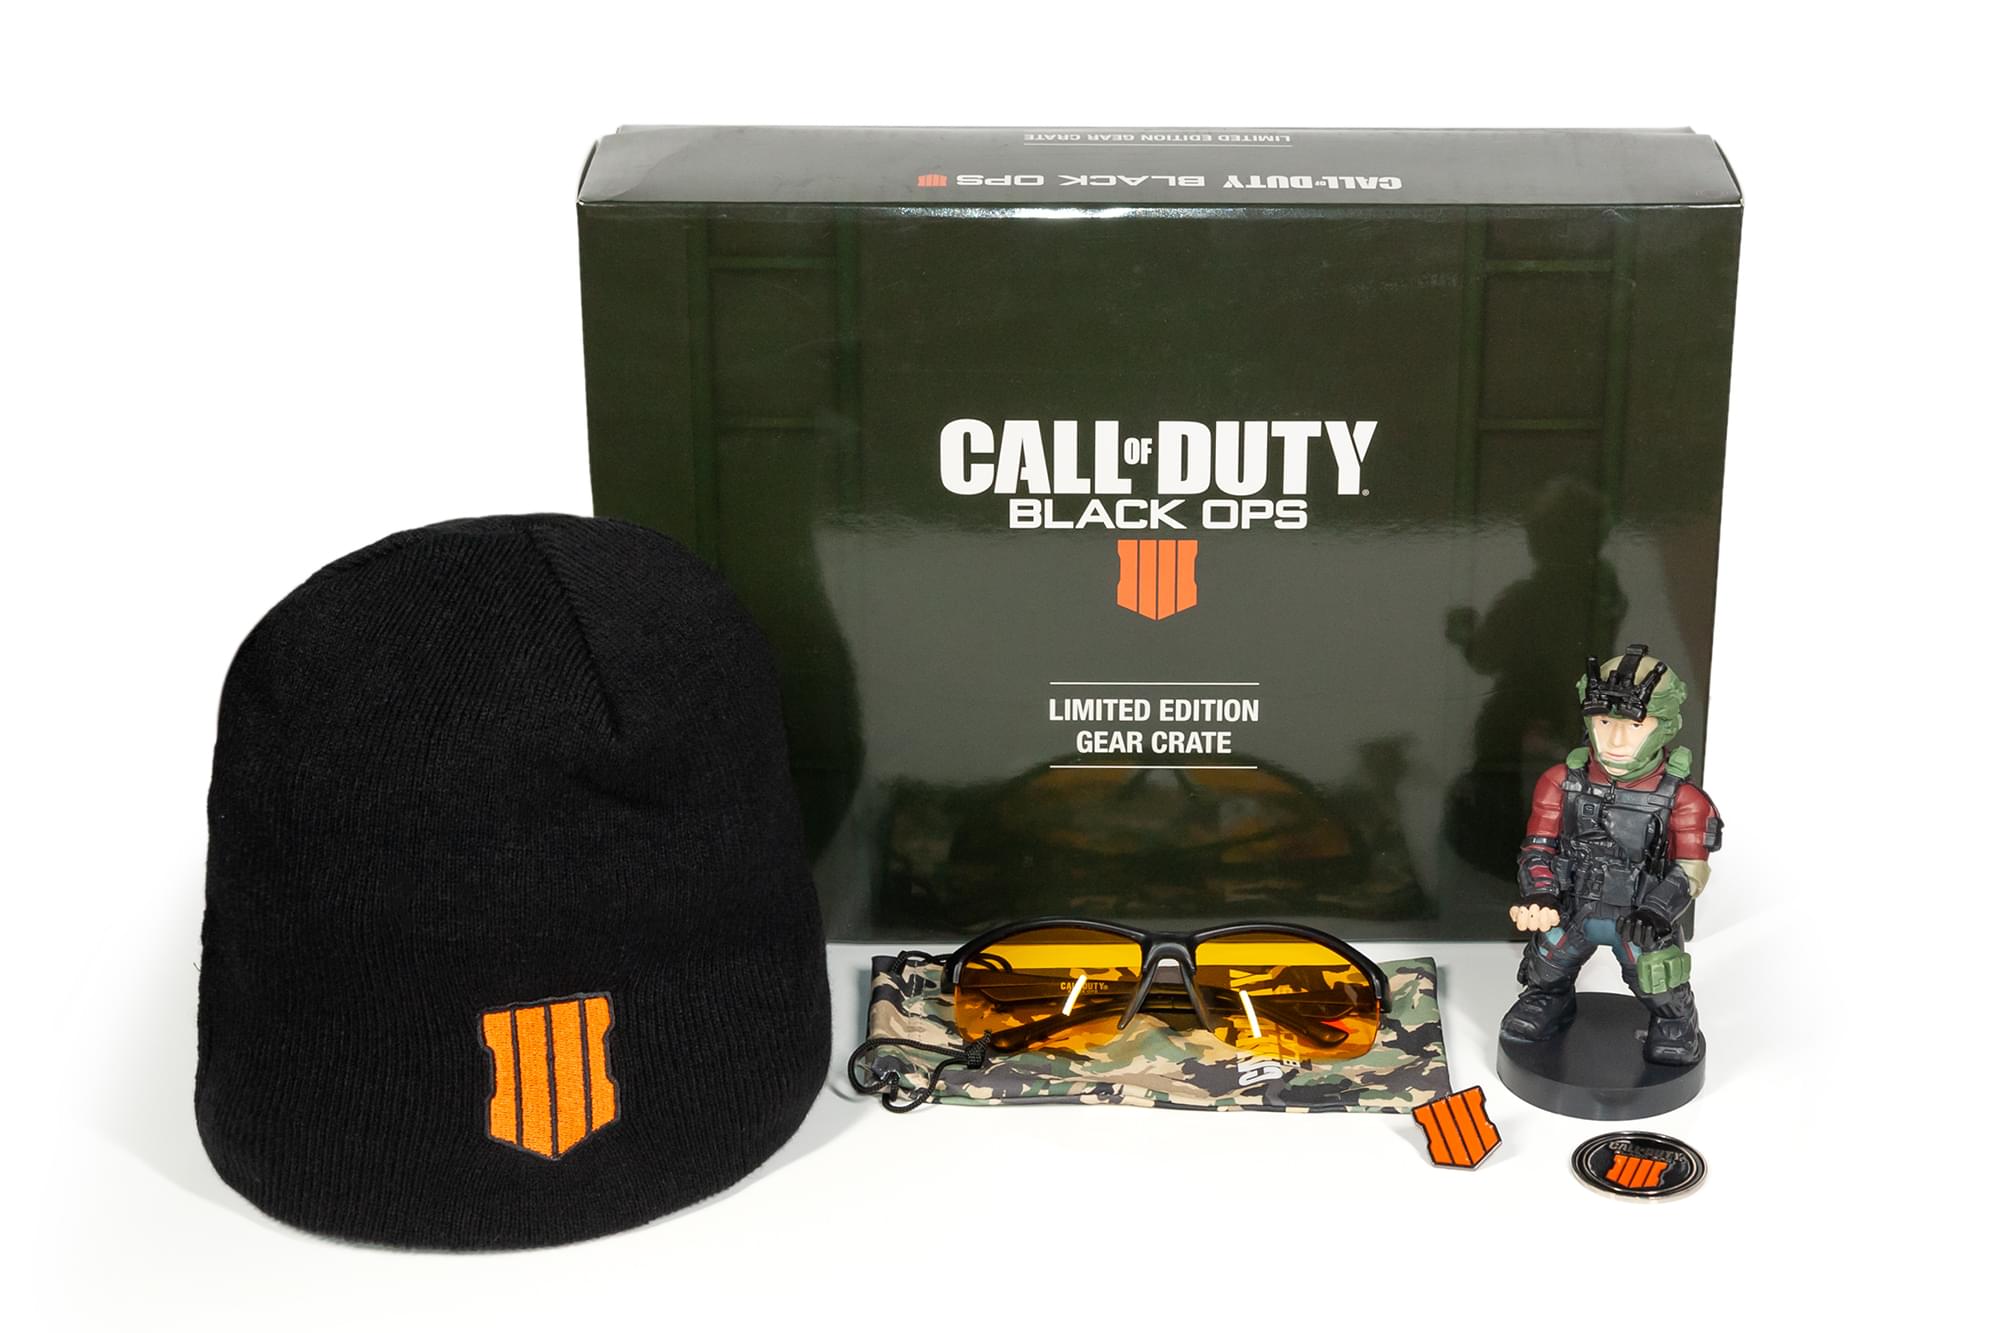 Call Of Duty: Black Ops 4 Gear Crate , Limited Edition Collectible Loot Box